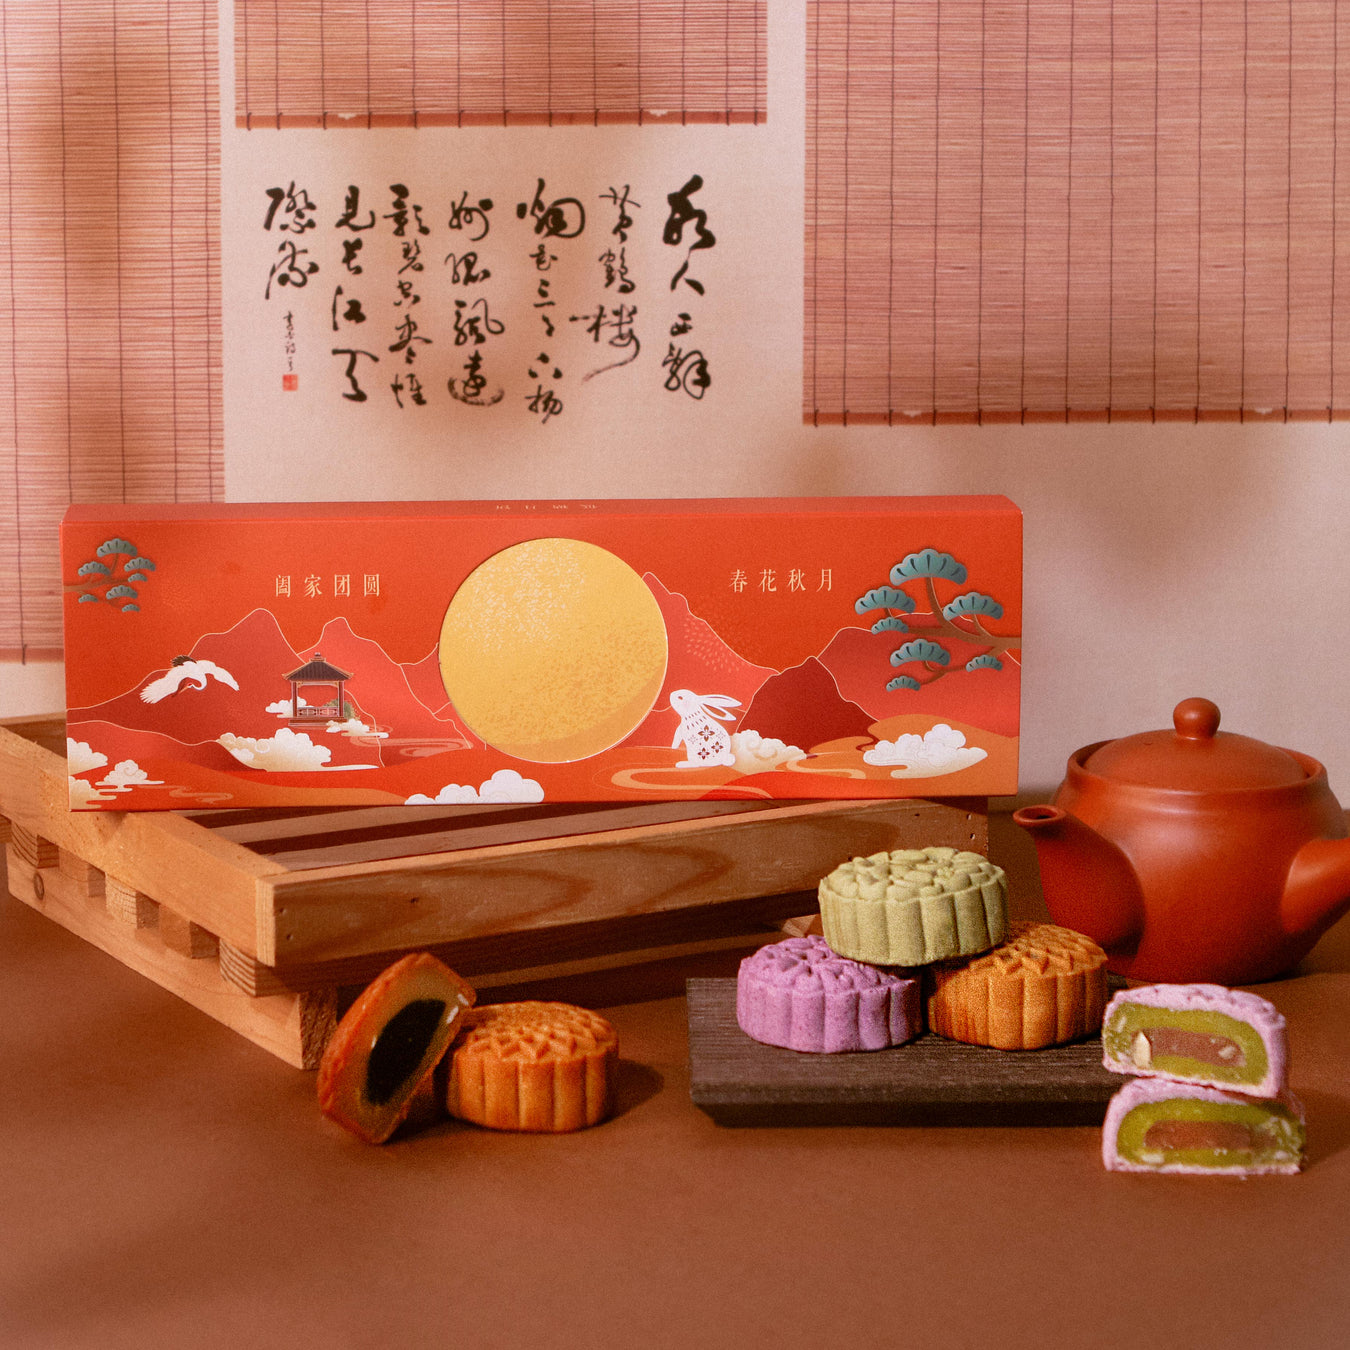 Full Moon Mooncake Gift Box - Cake Together - Online Mooncake Delivery